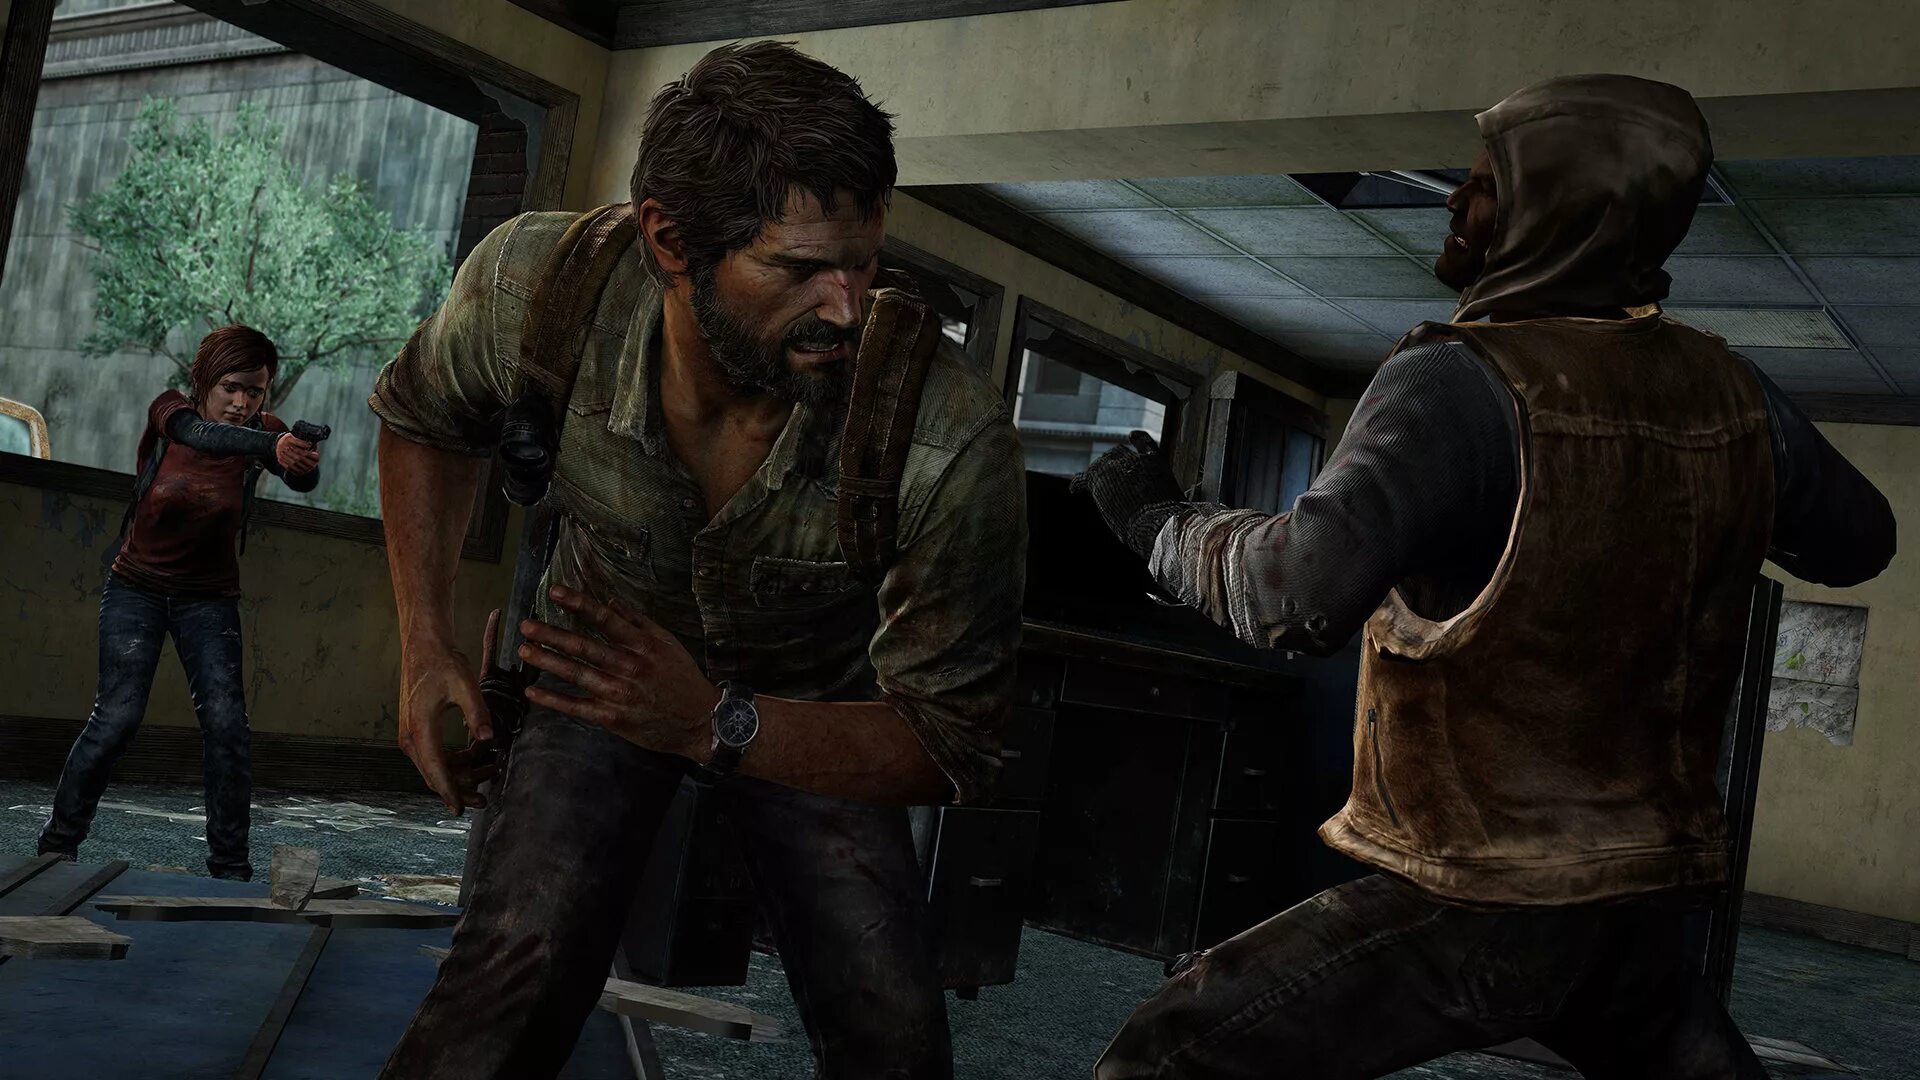 The last of us. The last of us 1. The last of us ремастер. The last of us 1 ps4. Last one game